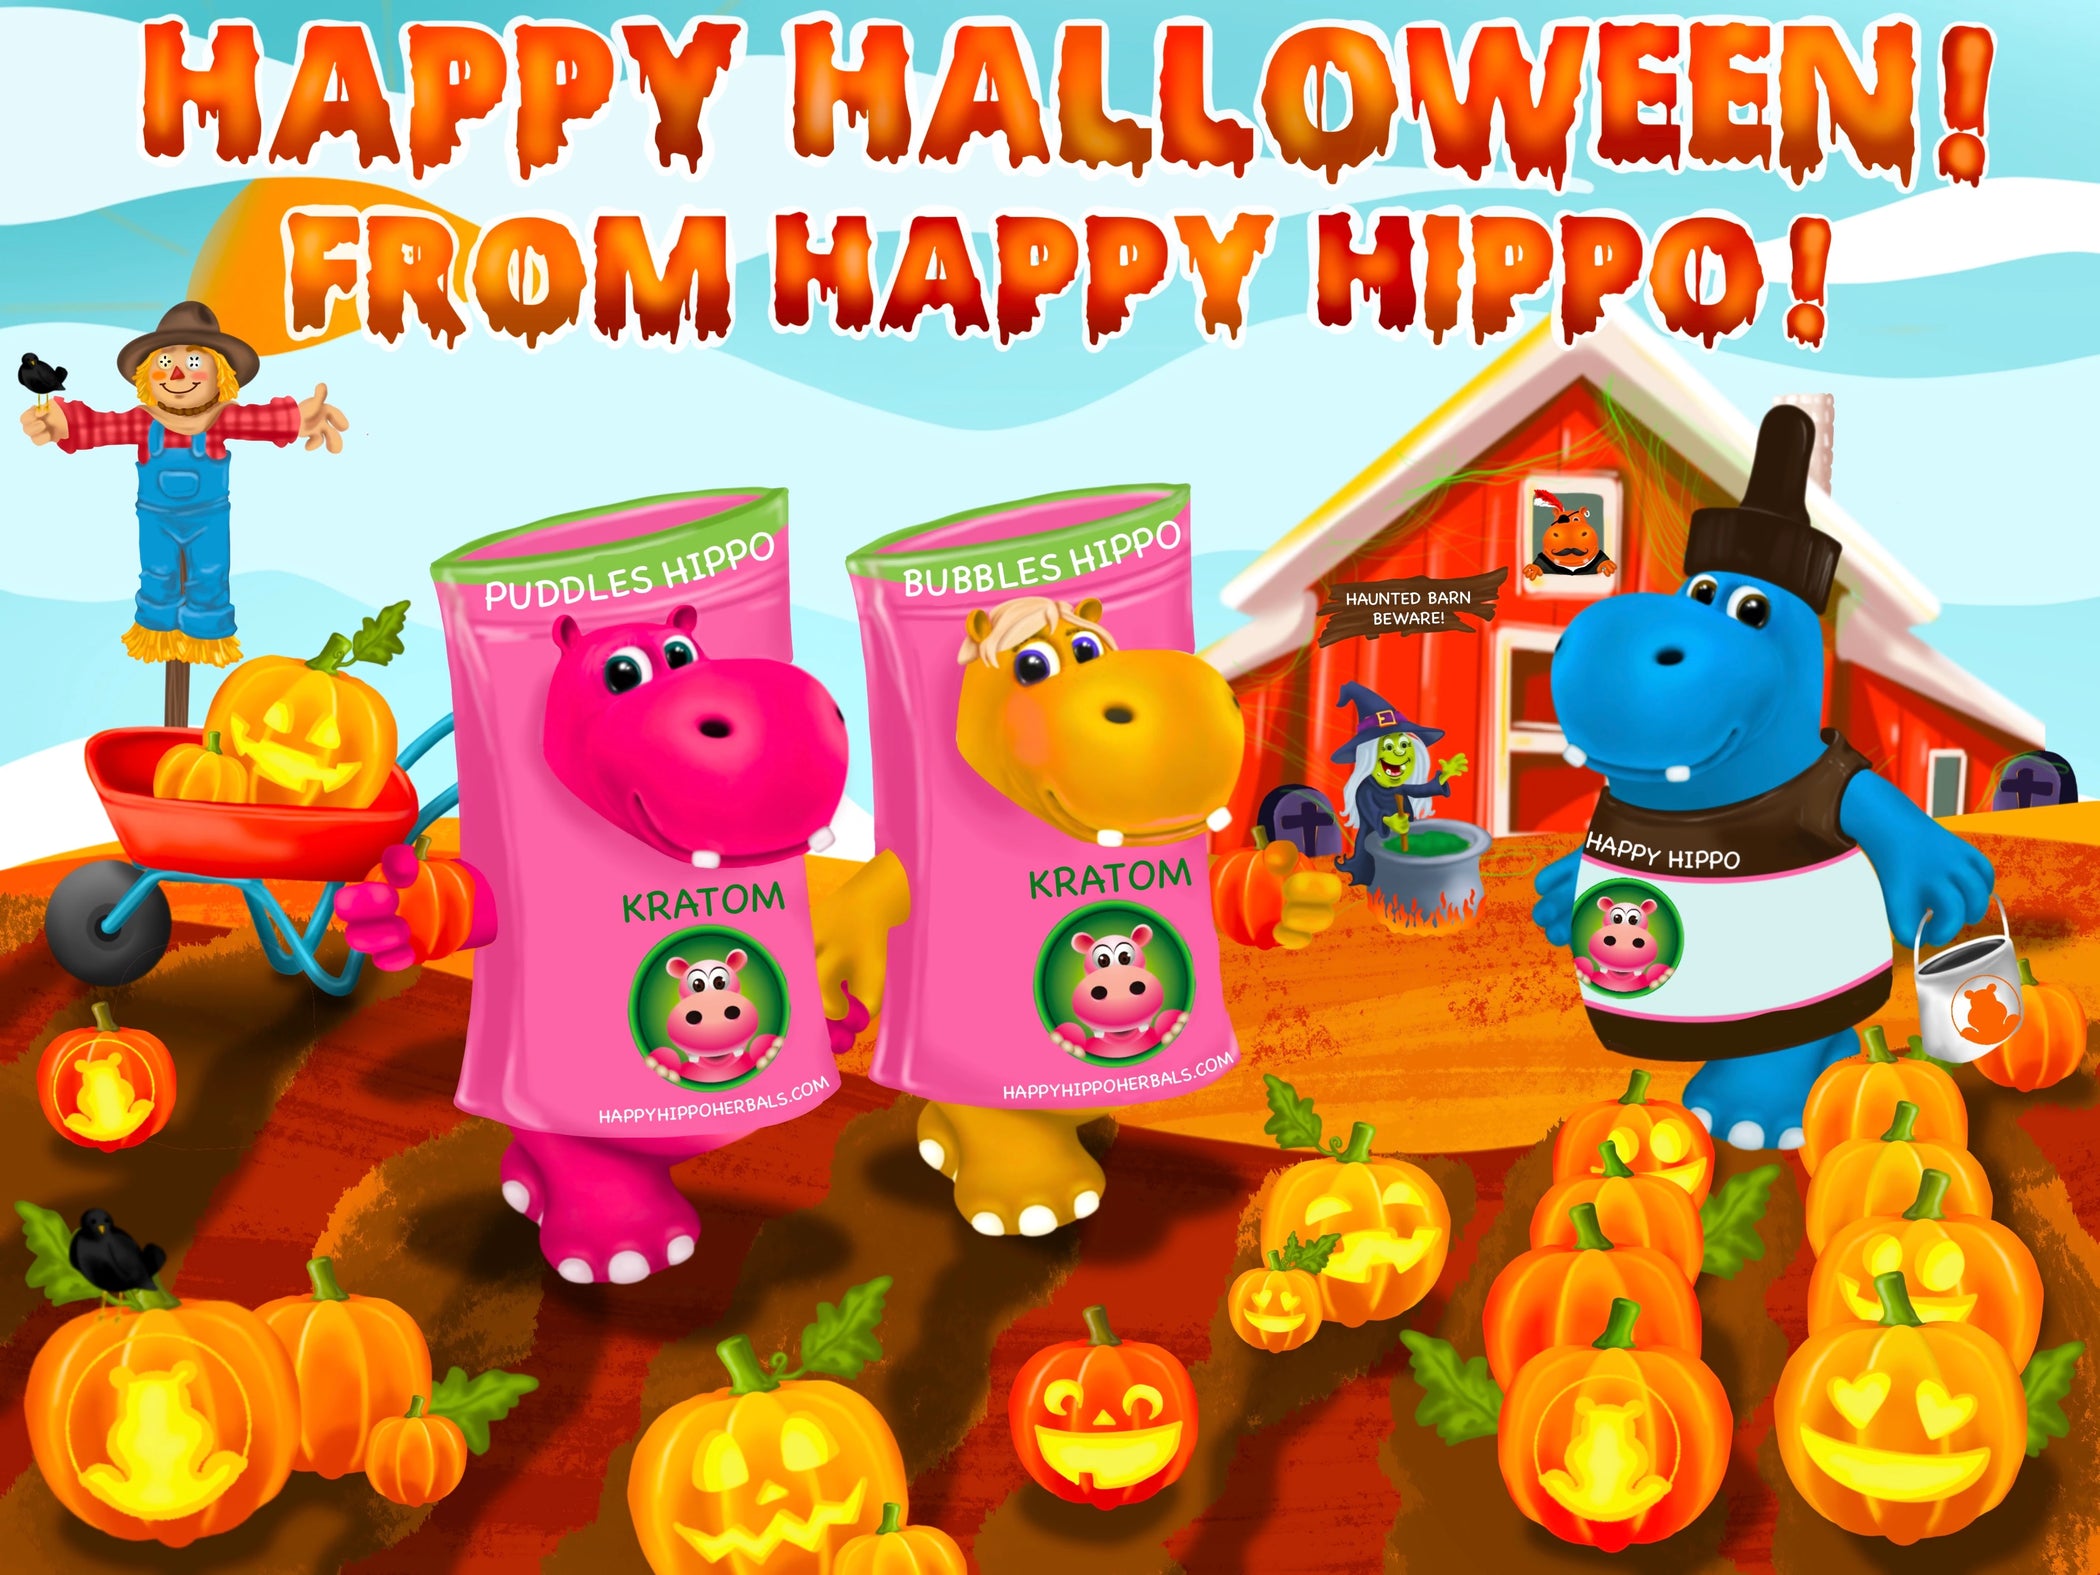 Graphic Designed image depicting Puddles and Bubbles the Hippo characters celebrating Halloween while enjoying a field of carved jack-o-lanterns. Both Puddles and Bubbles are wearing costumes of Happy Hippo brand kratom powder!